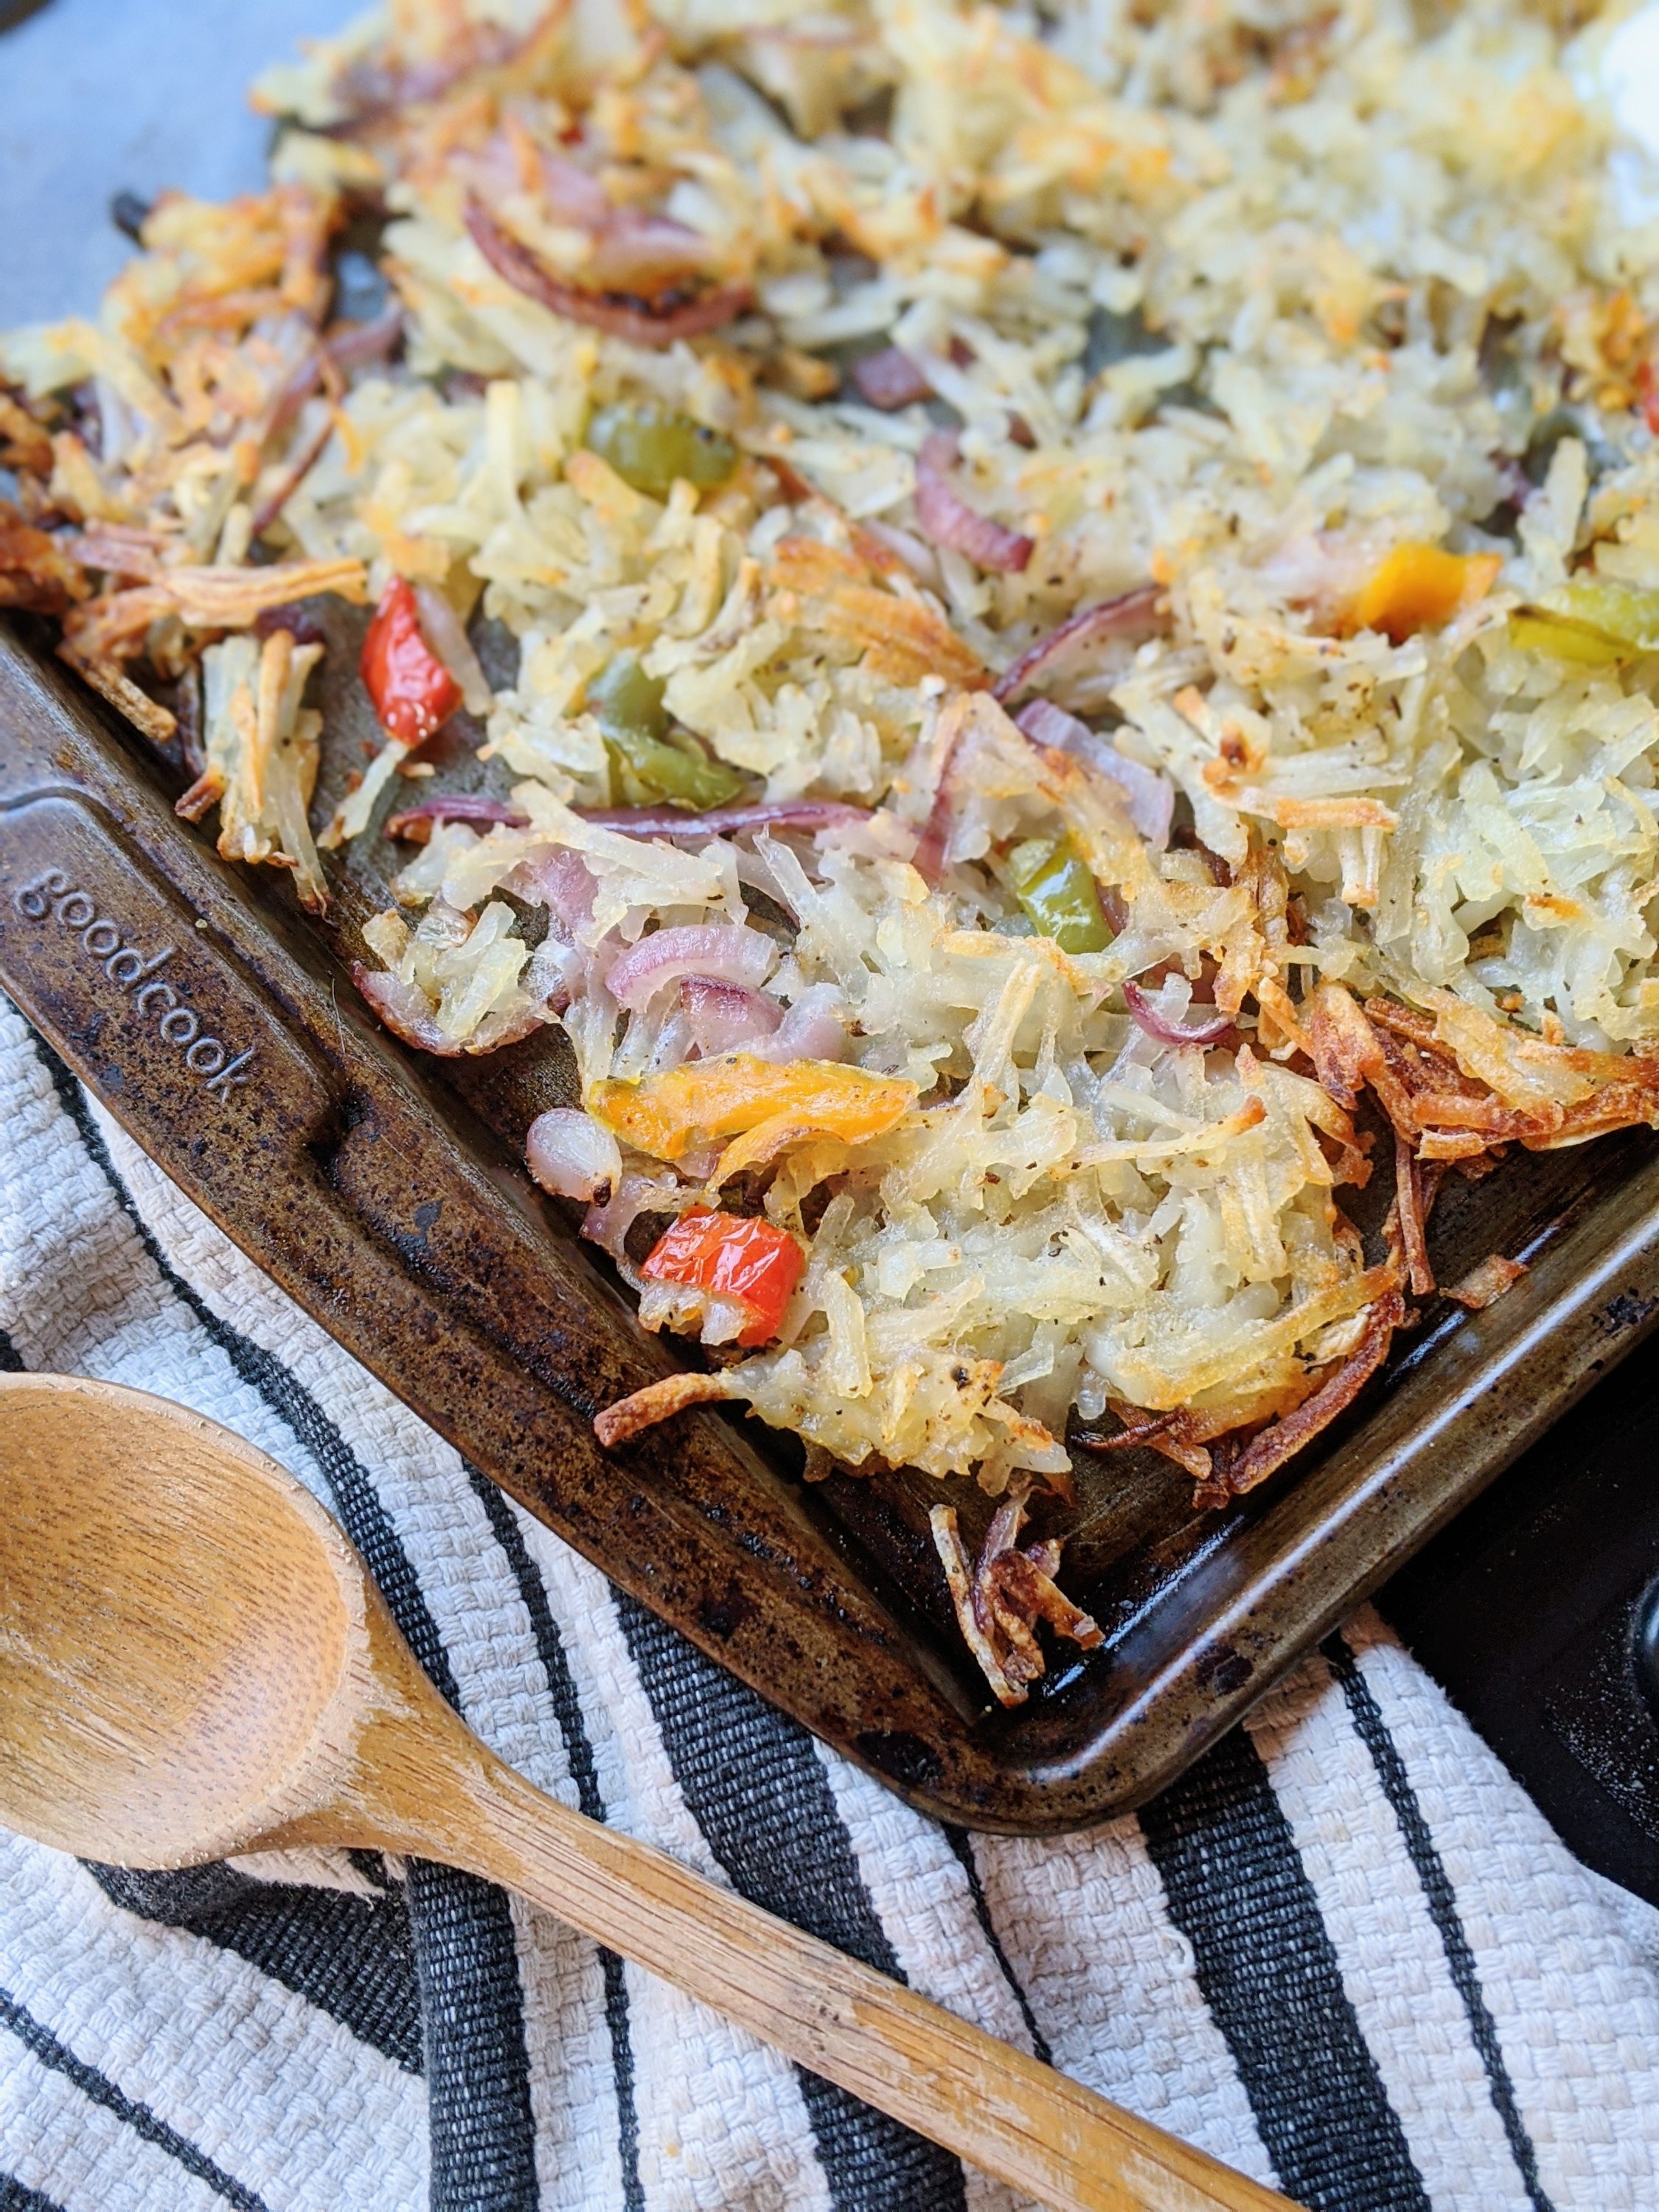 sheet pan hash browns and vegetables healthy breakfast ideas veganuary sheet pan vegan meals for breakfast or brunch or breakfast for dinner one pan in the oven cooks quickly 30 minutes